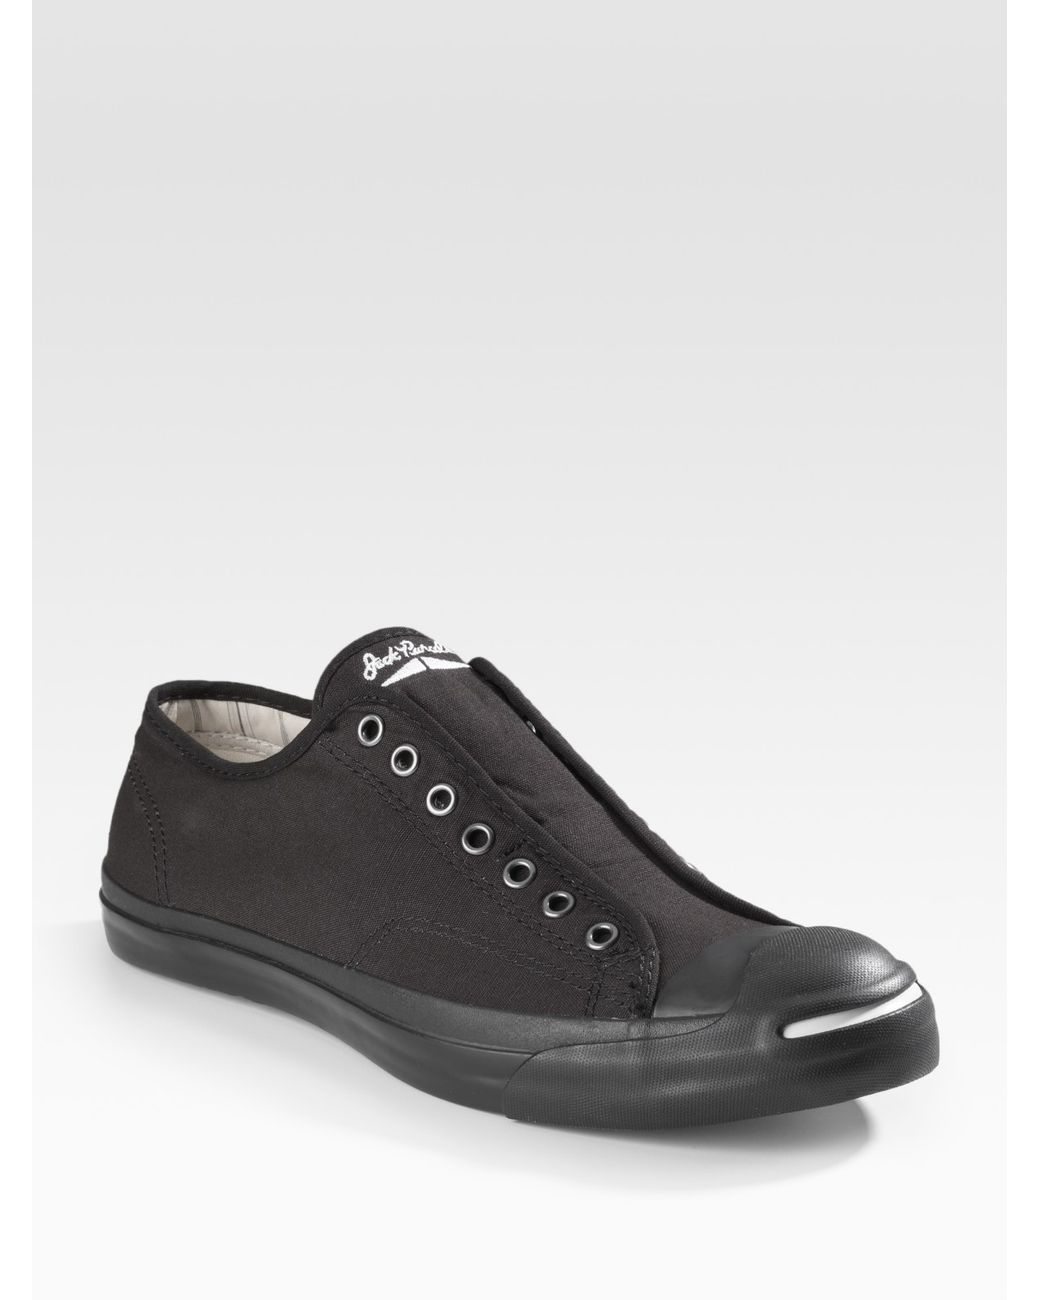 Converse Jack Purcell Slip On in Black for Men | Lyst